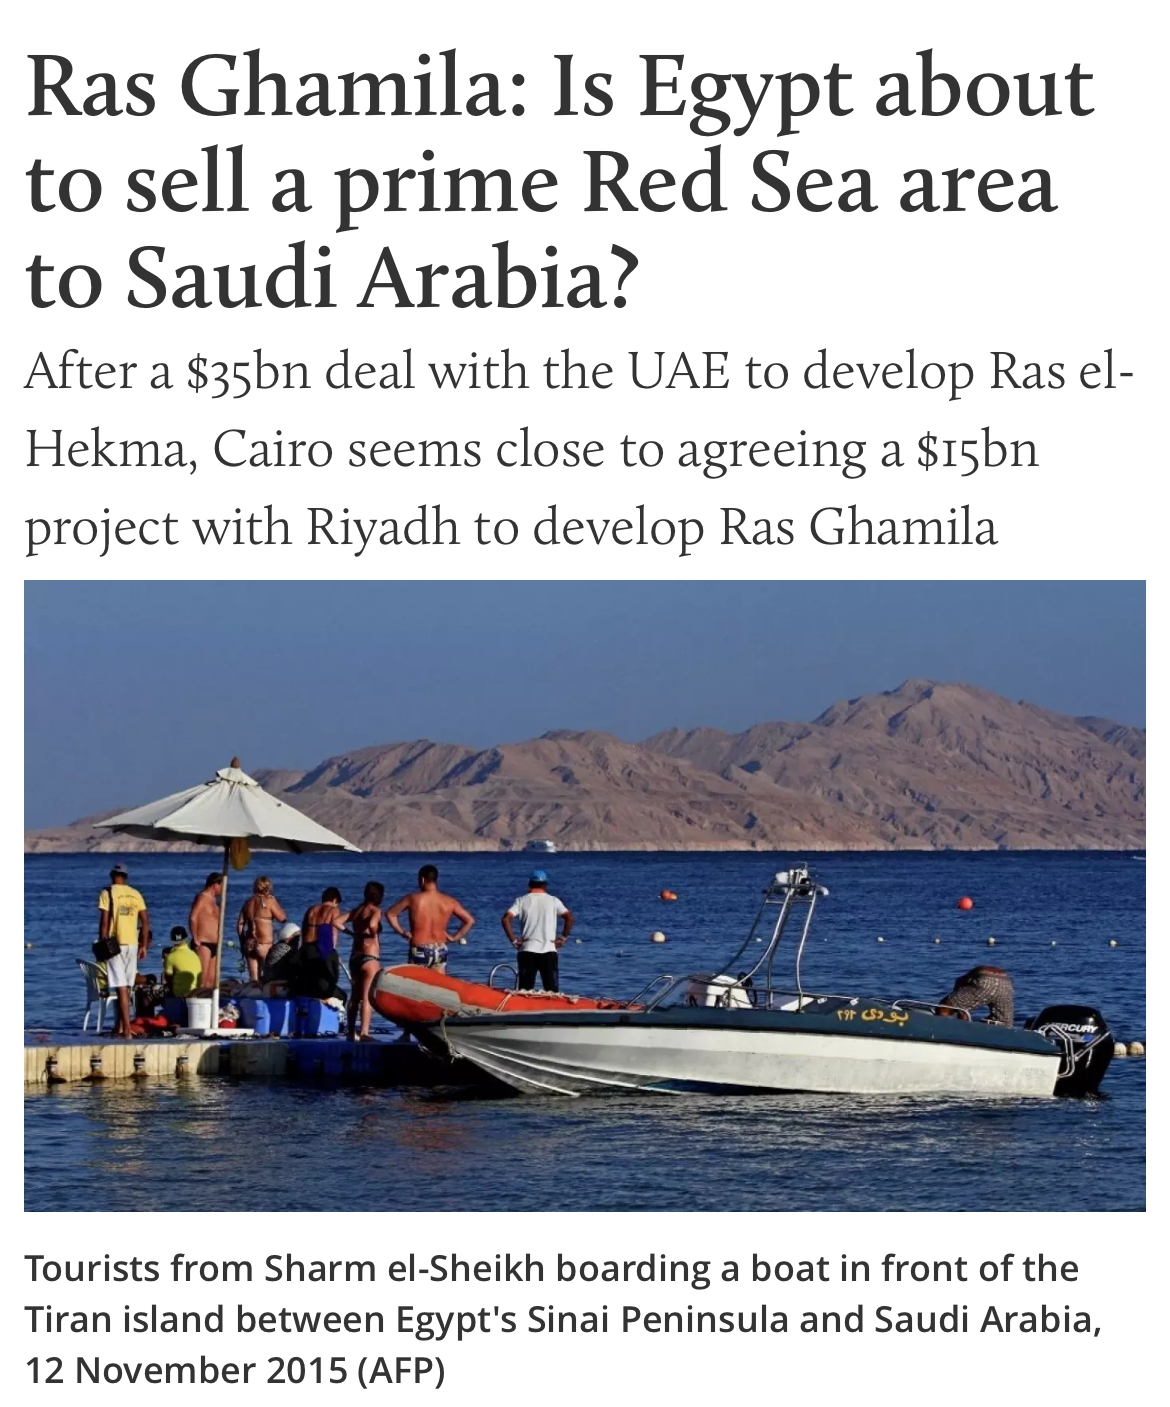 Ras Ghamila Is Egypt about to sell a prime Red Sea area to Saudi Arabia  Middle East Eye.jpeg.png